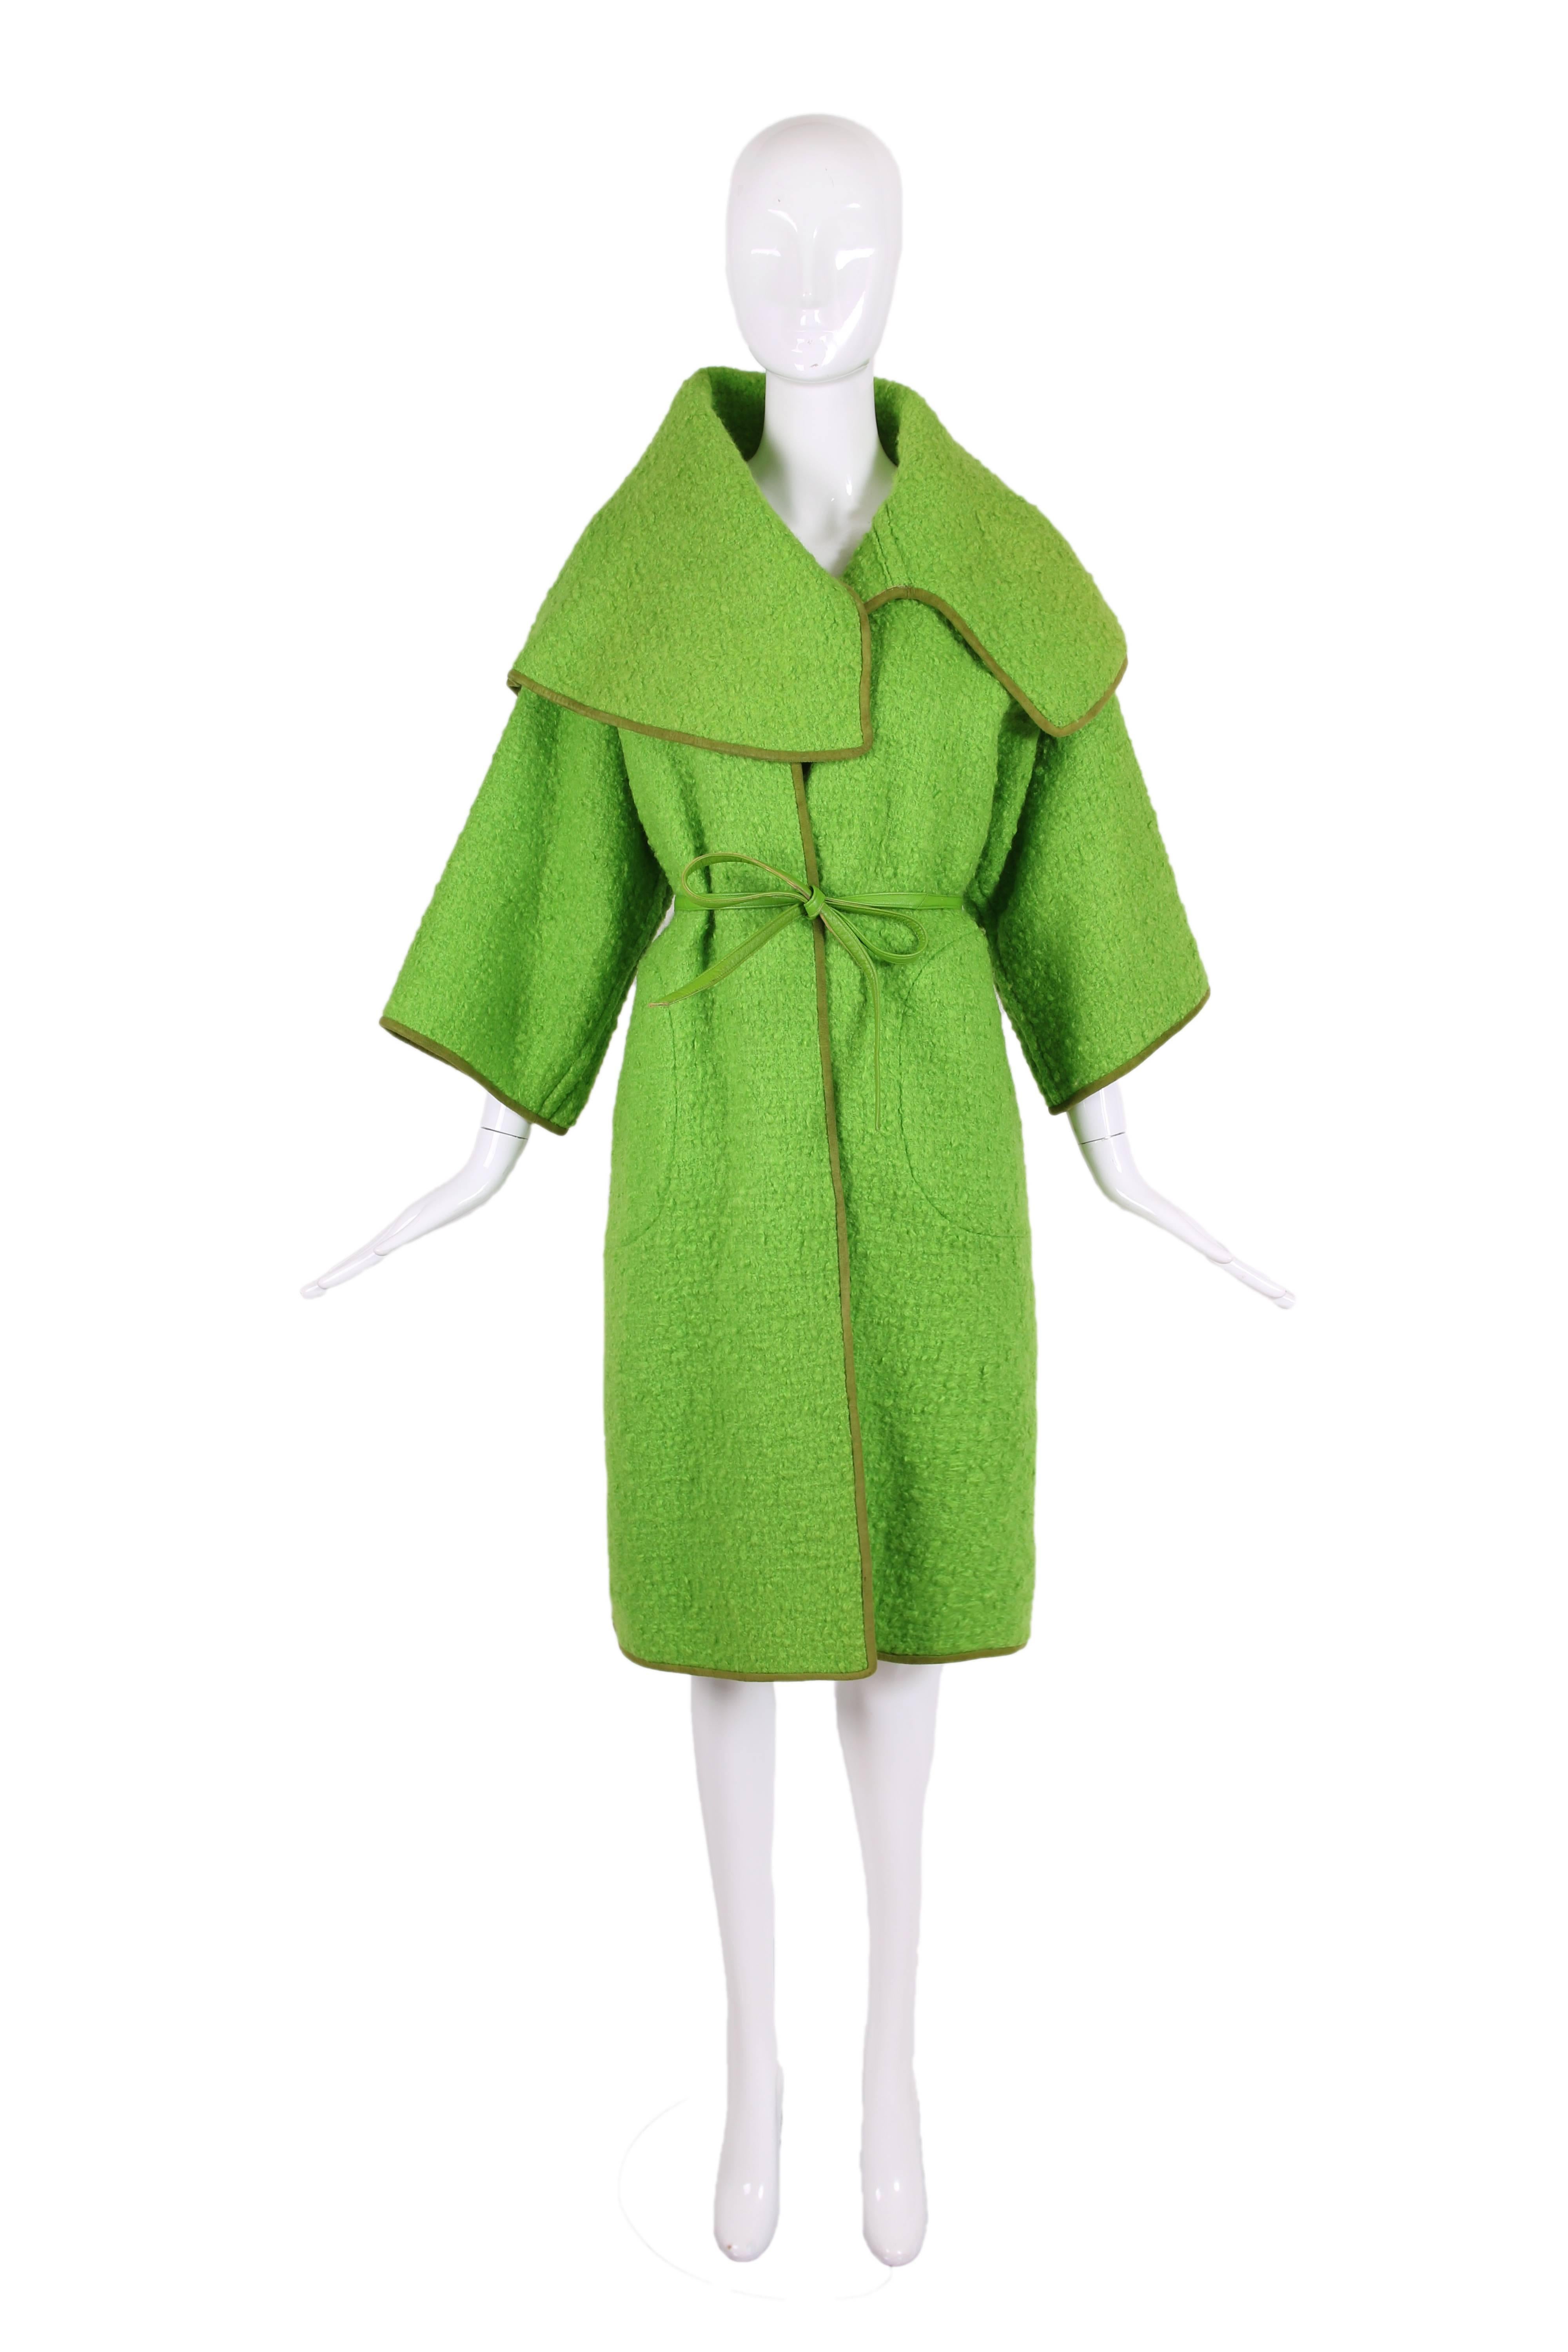 1960's Bonnie Cashin for Sills lime green boucle wool coat with olive green suede trim and chartreuse leather belt. The belt is held in place with gold-toned belt loops at each side of waist. The coat features an over-sized collar that comes to a